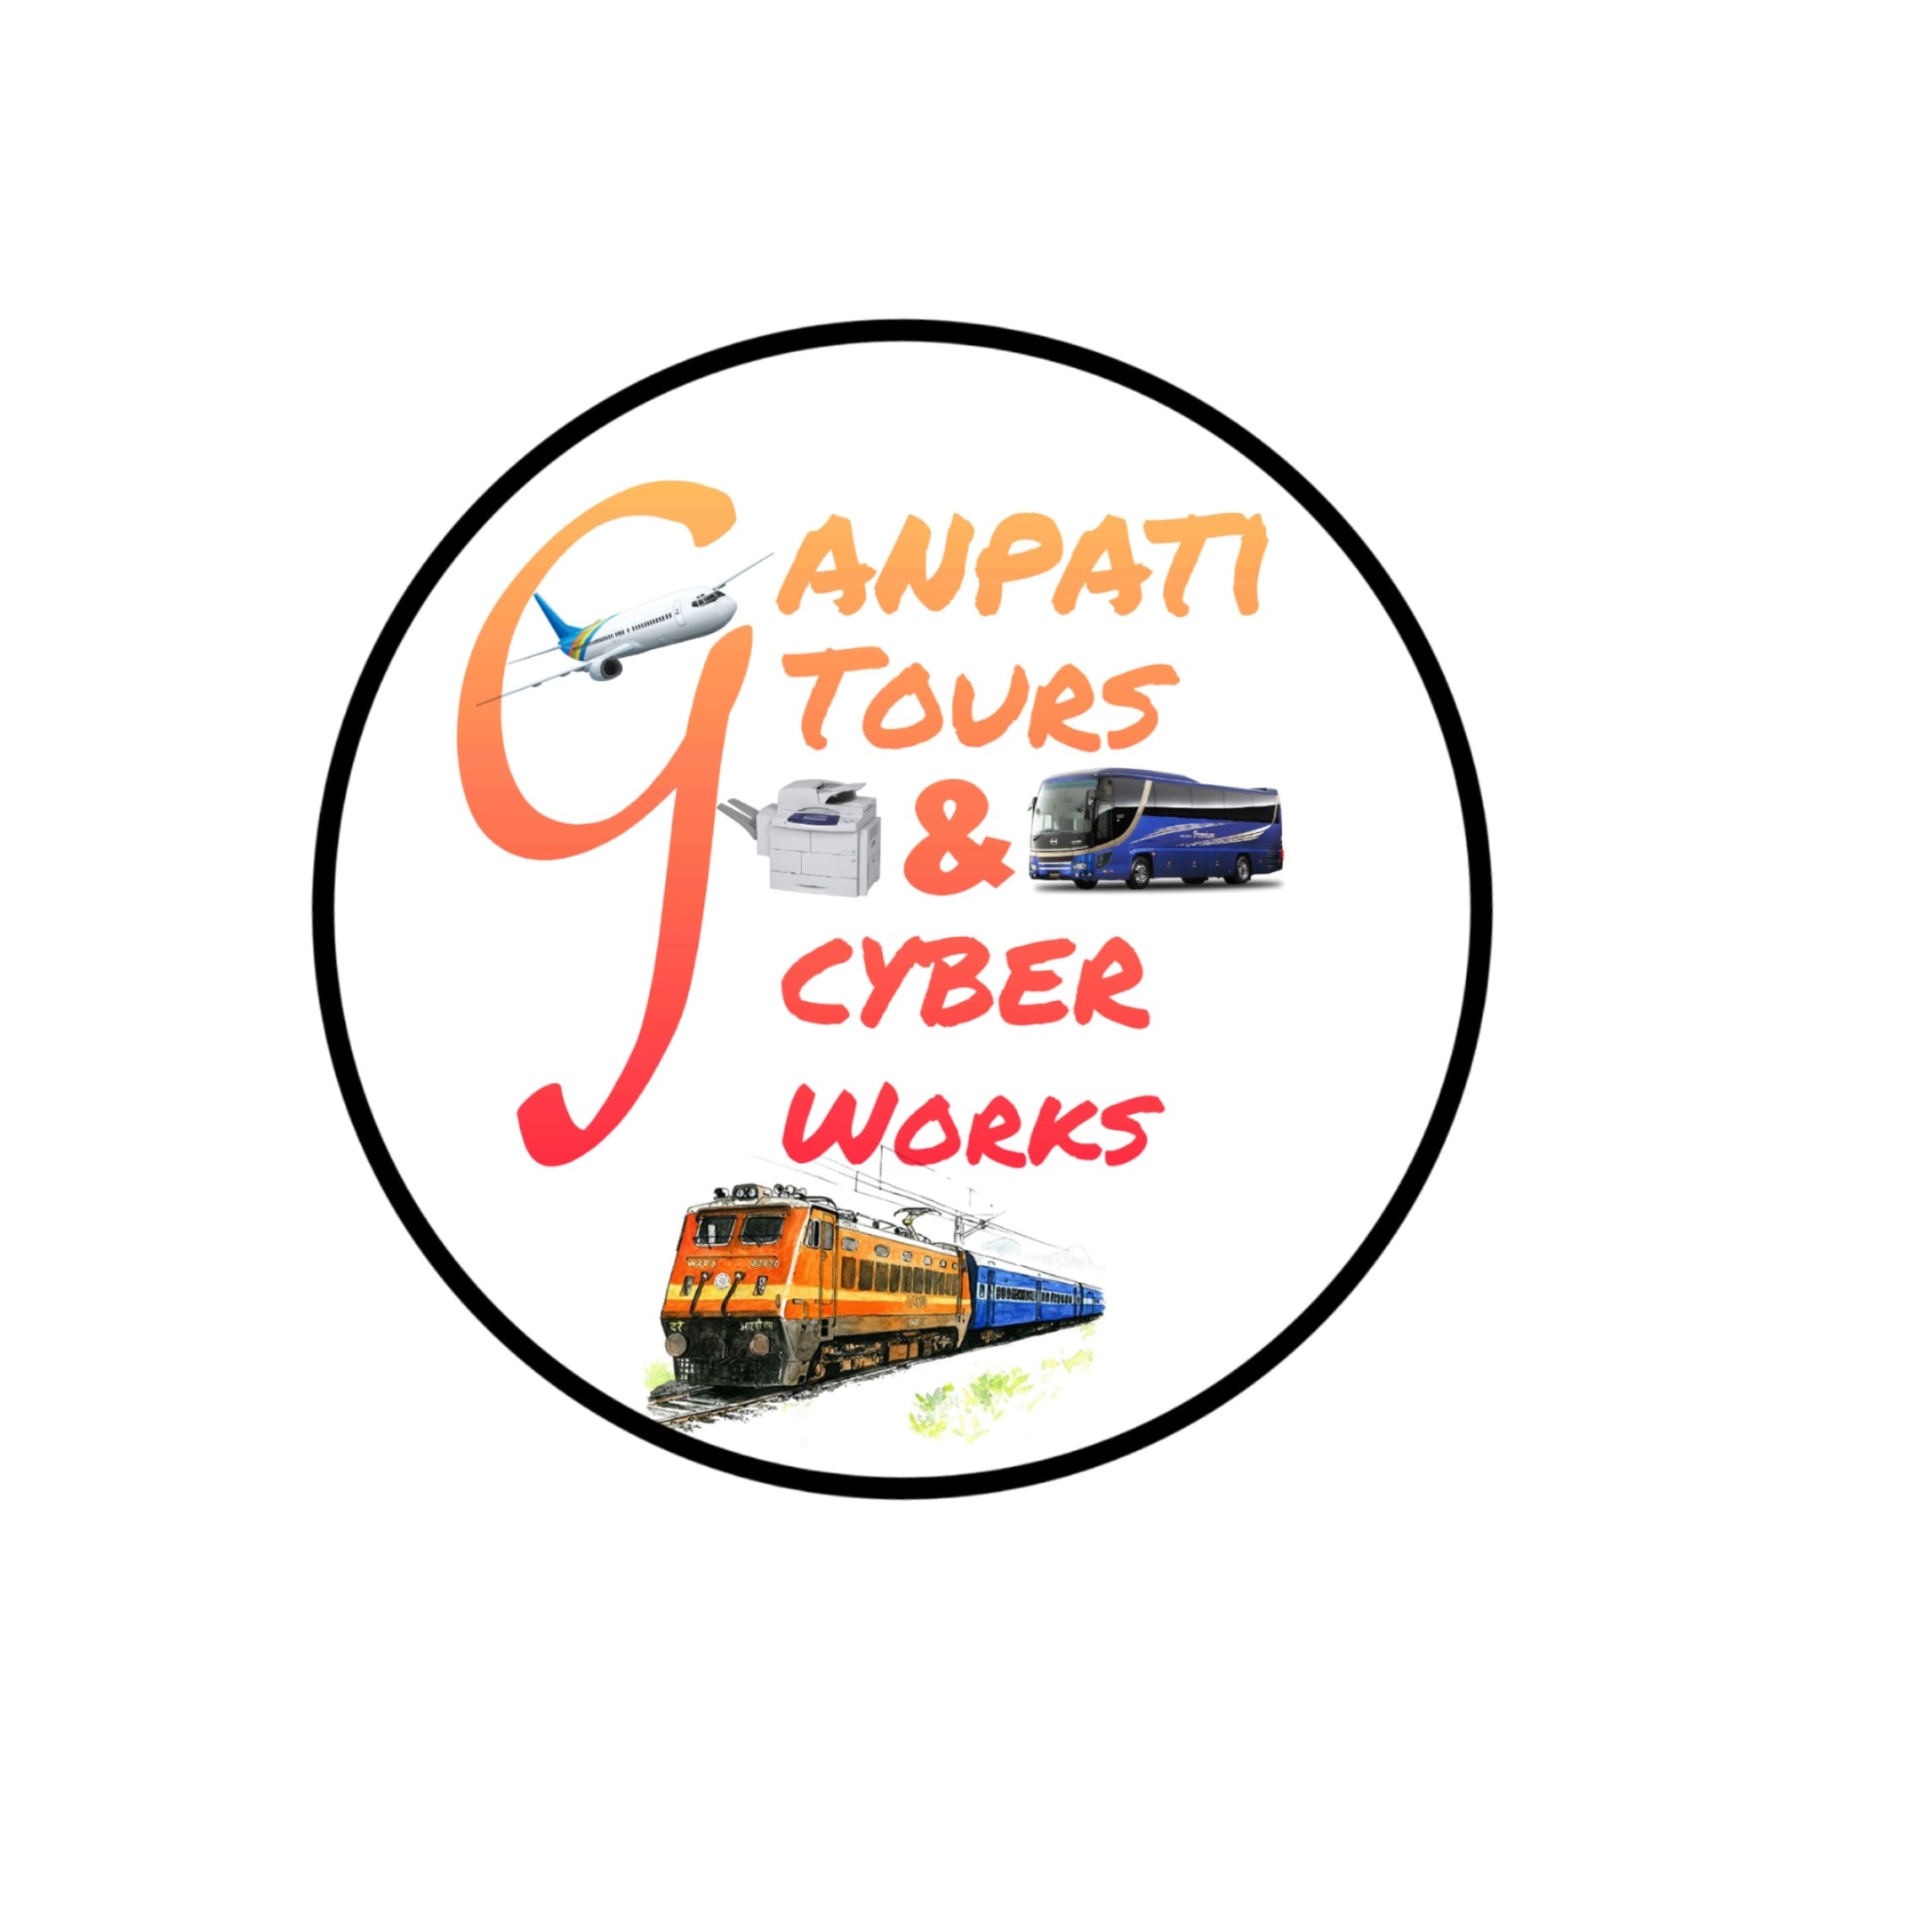 Ganpati Tour And Cyber Cafe Works